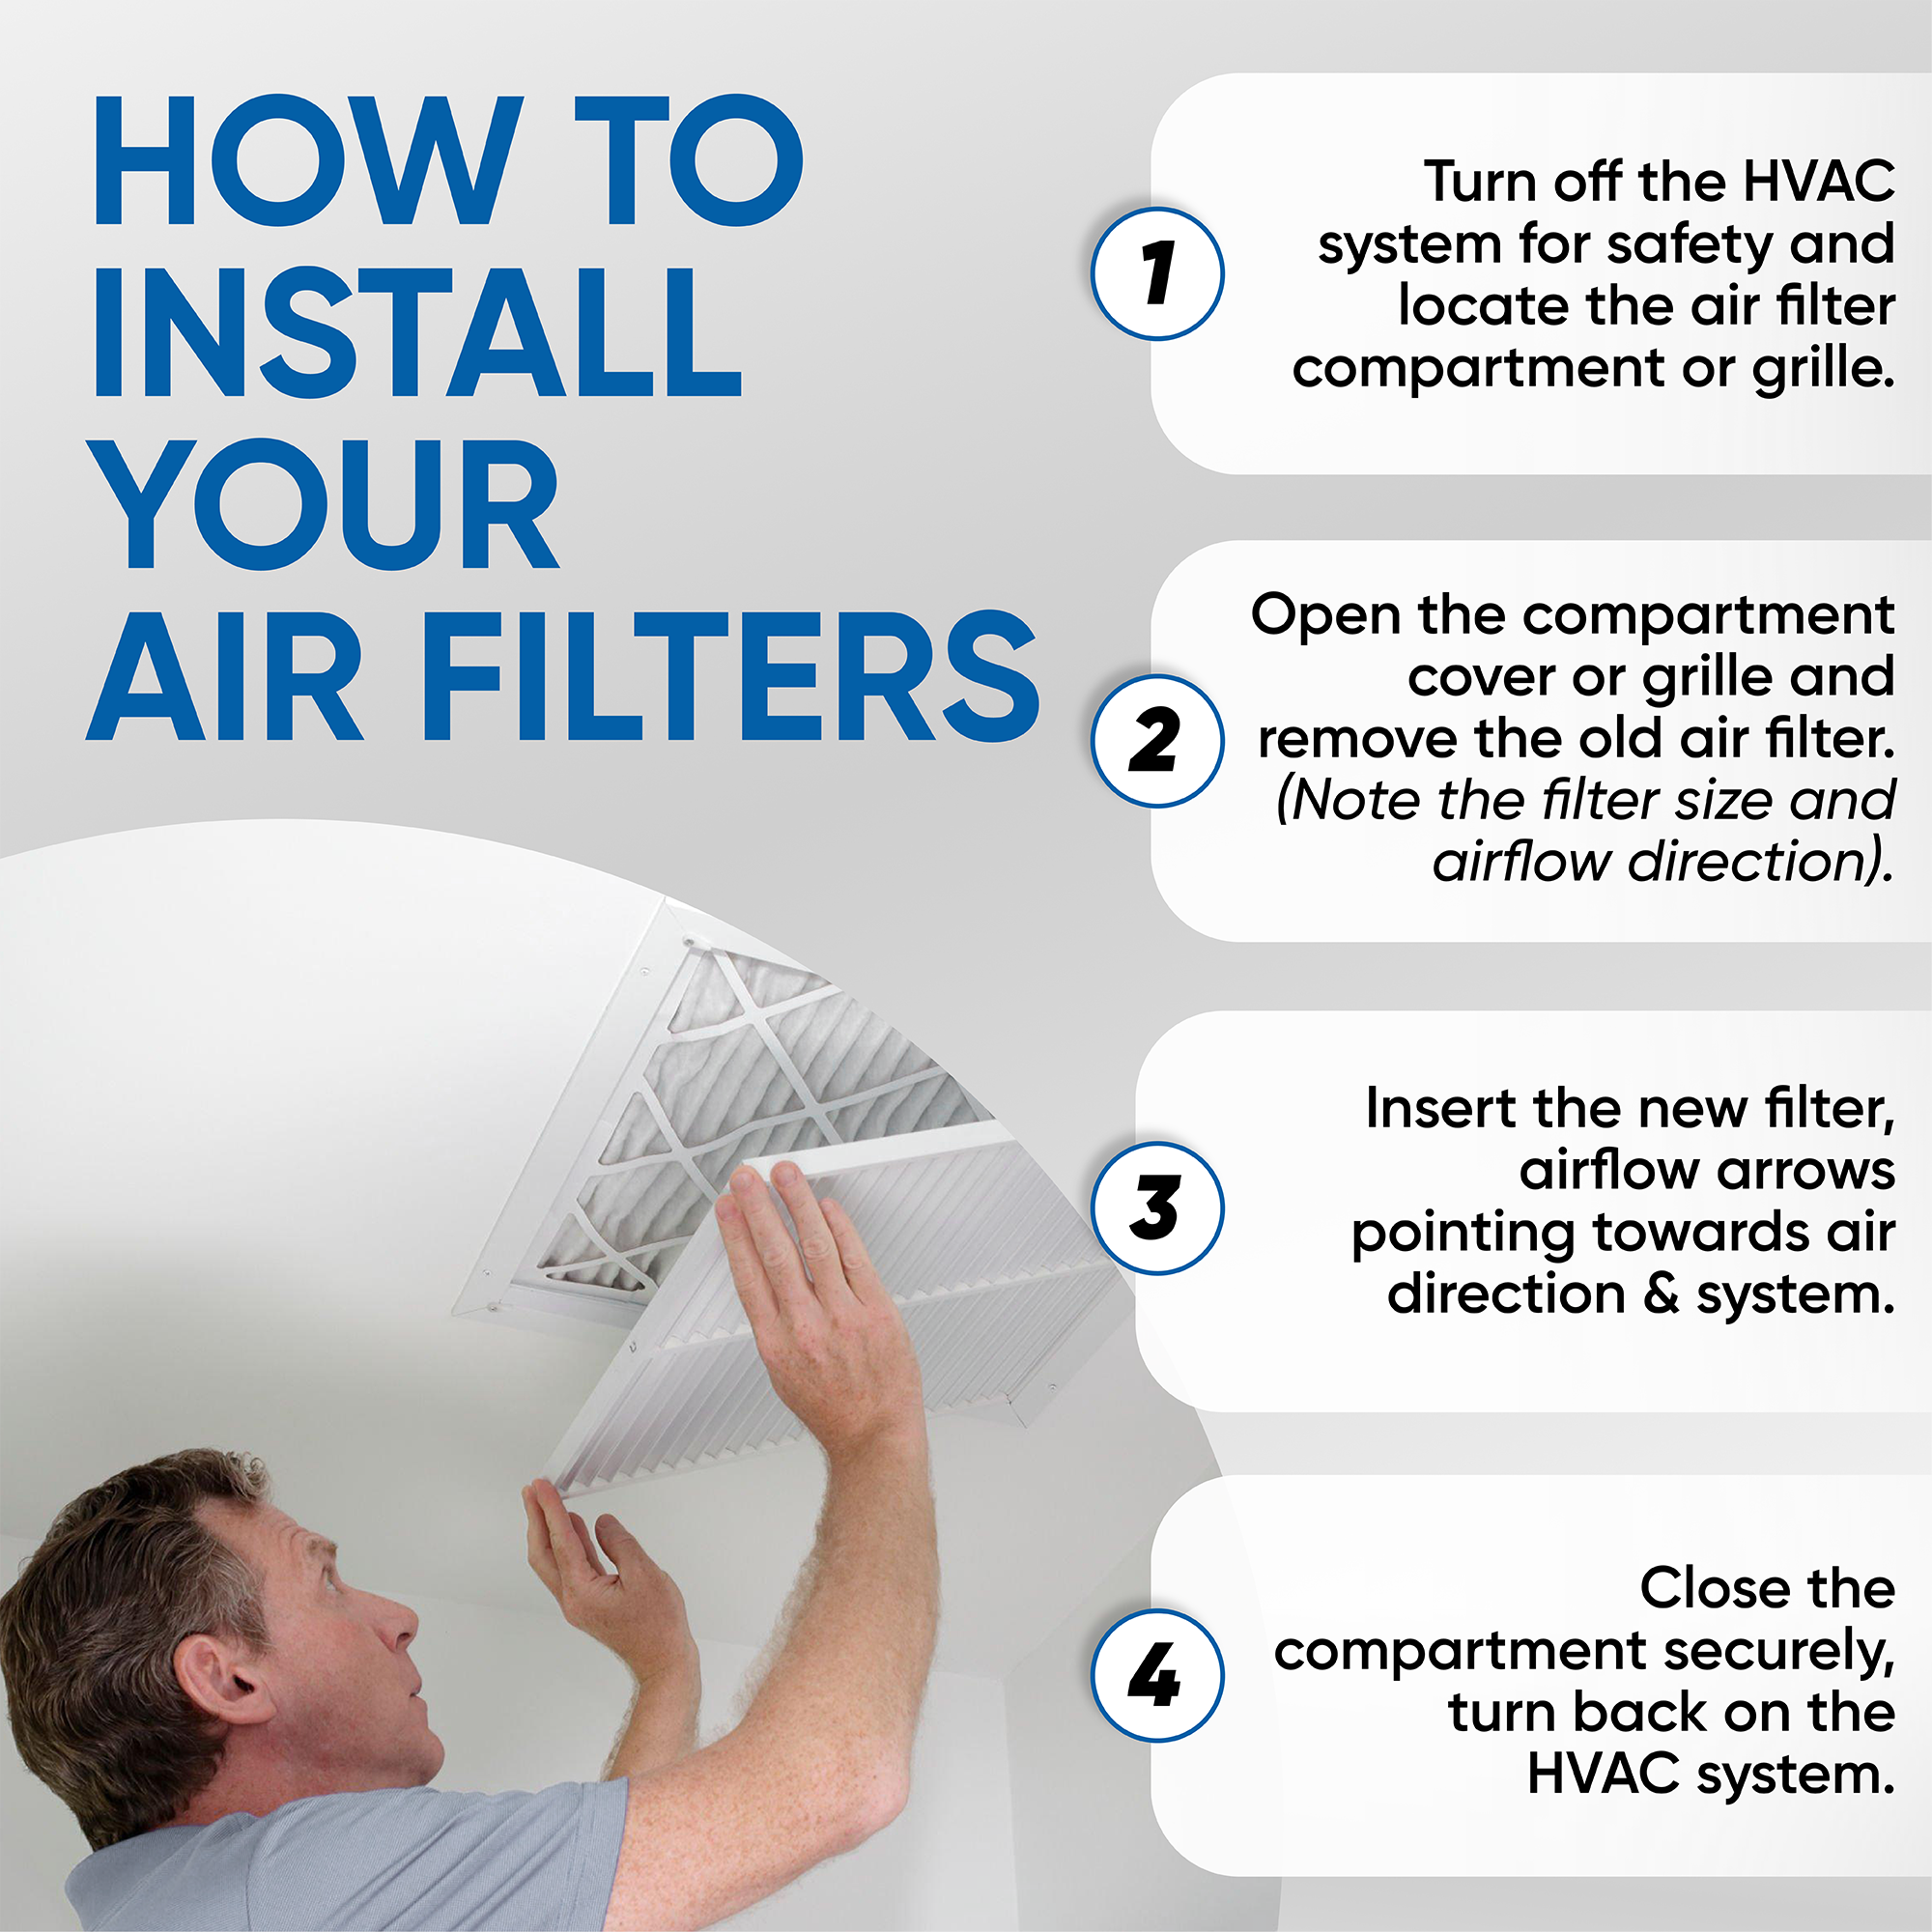 Filters Delivered 24x24x4 MERV 13 HVAC Air Filters.  4 Pack  (Actual Depth: 3-3/4")